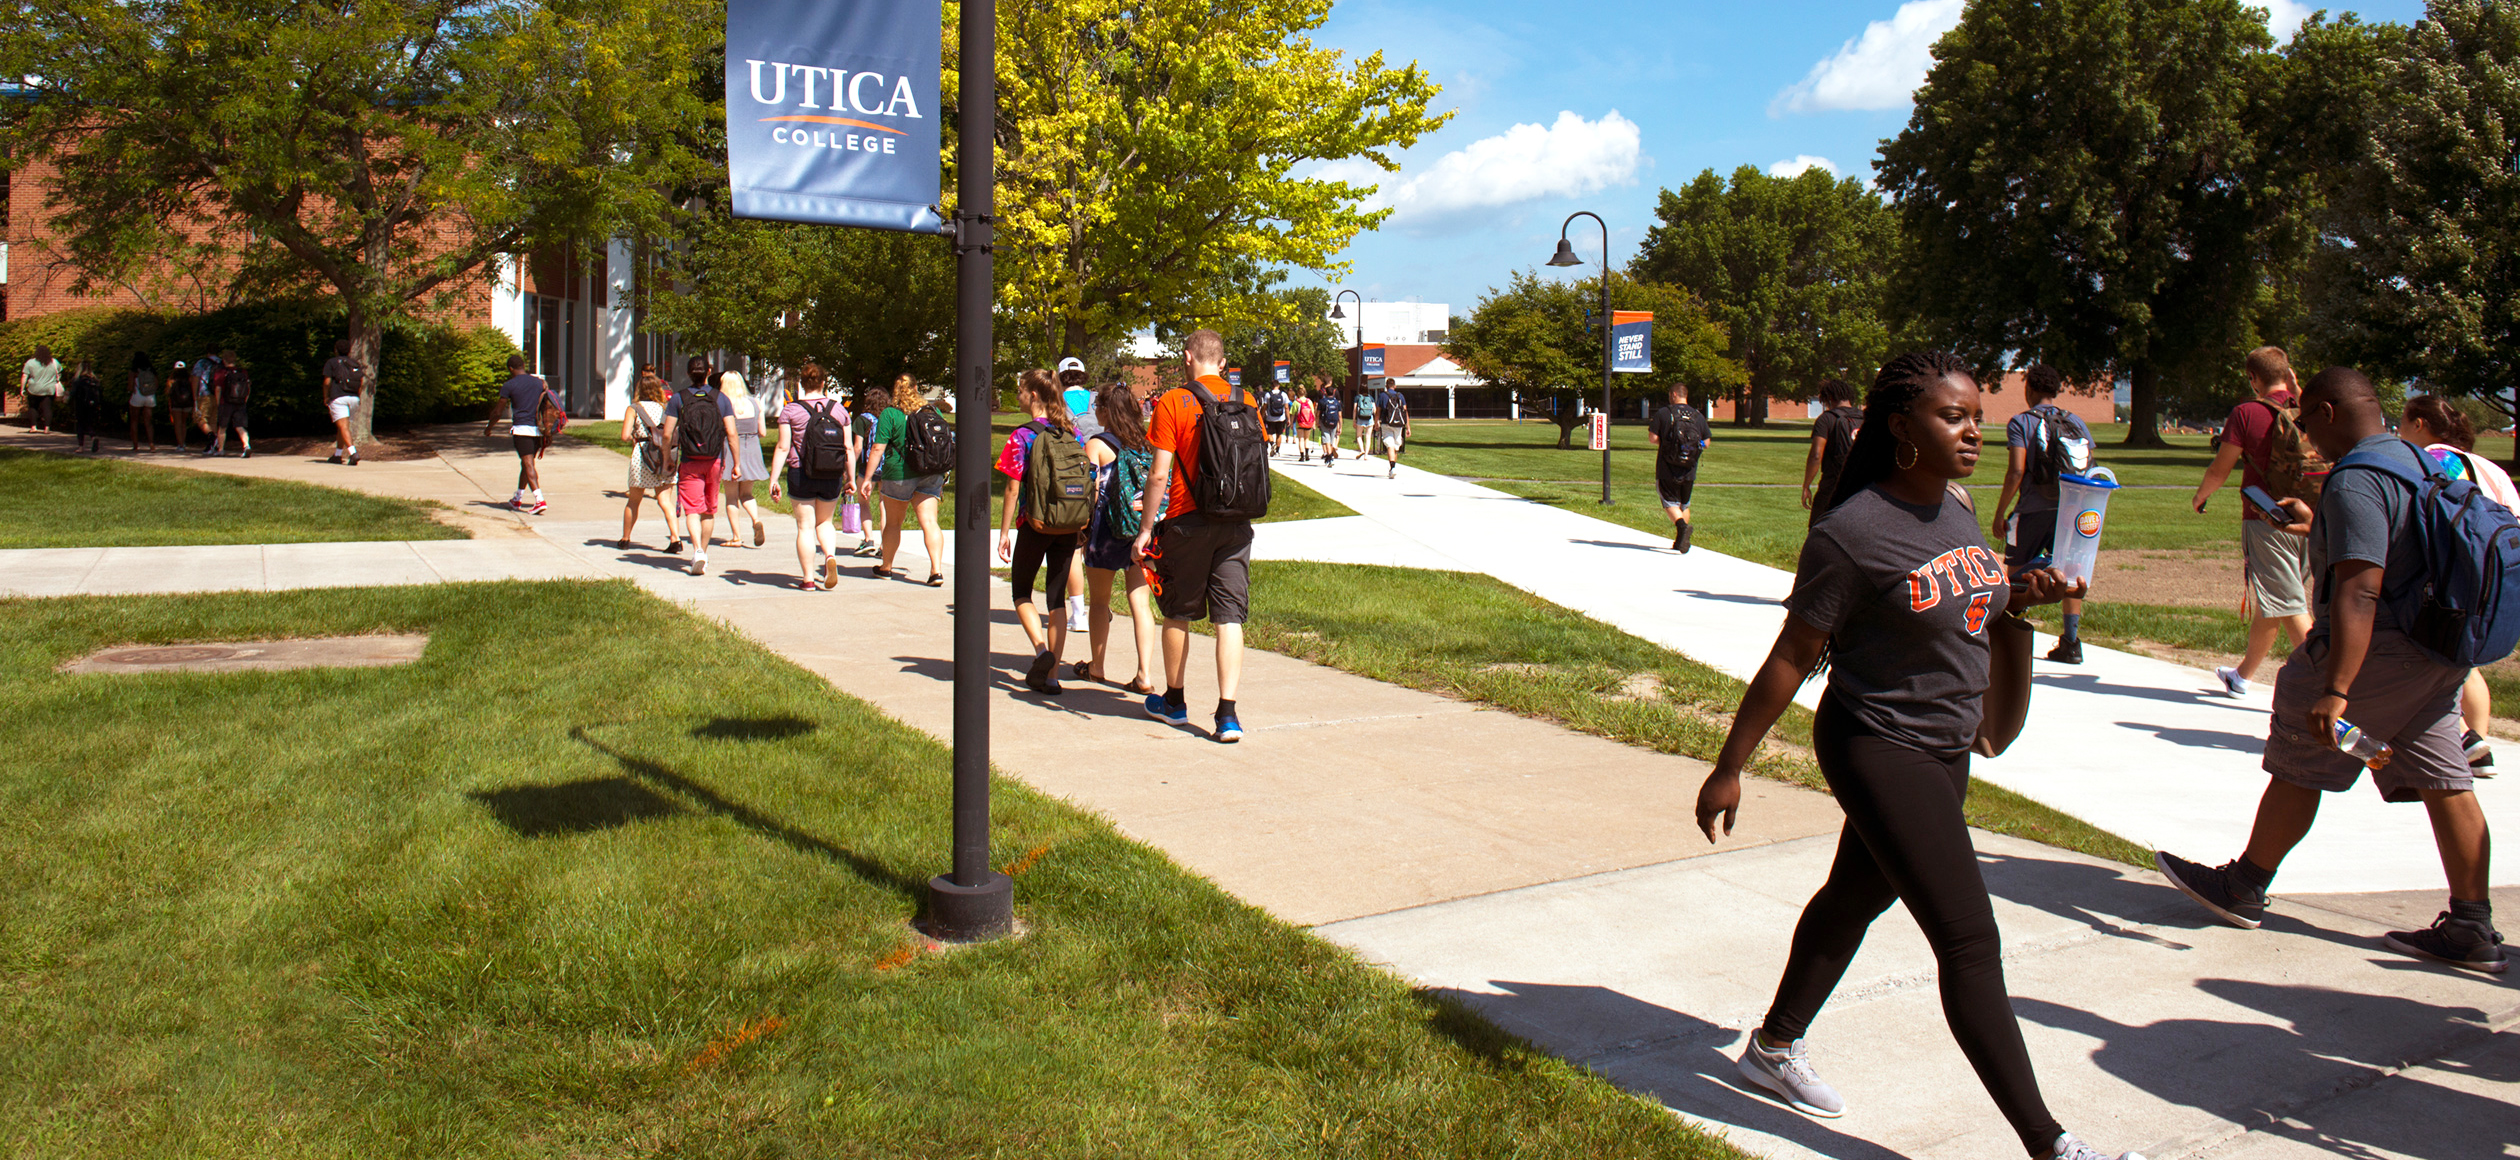 The Applied Ethics Institute at Utica University - Ethics & Public Policy Newsletter - May 2017